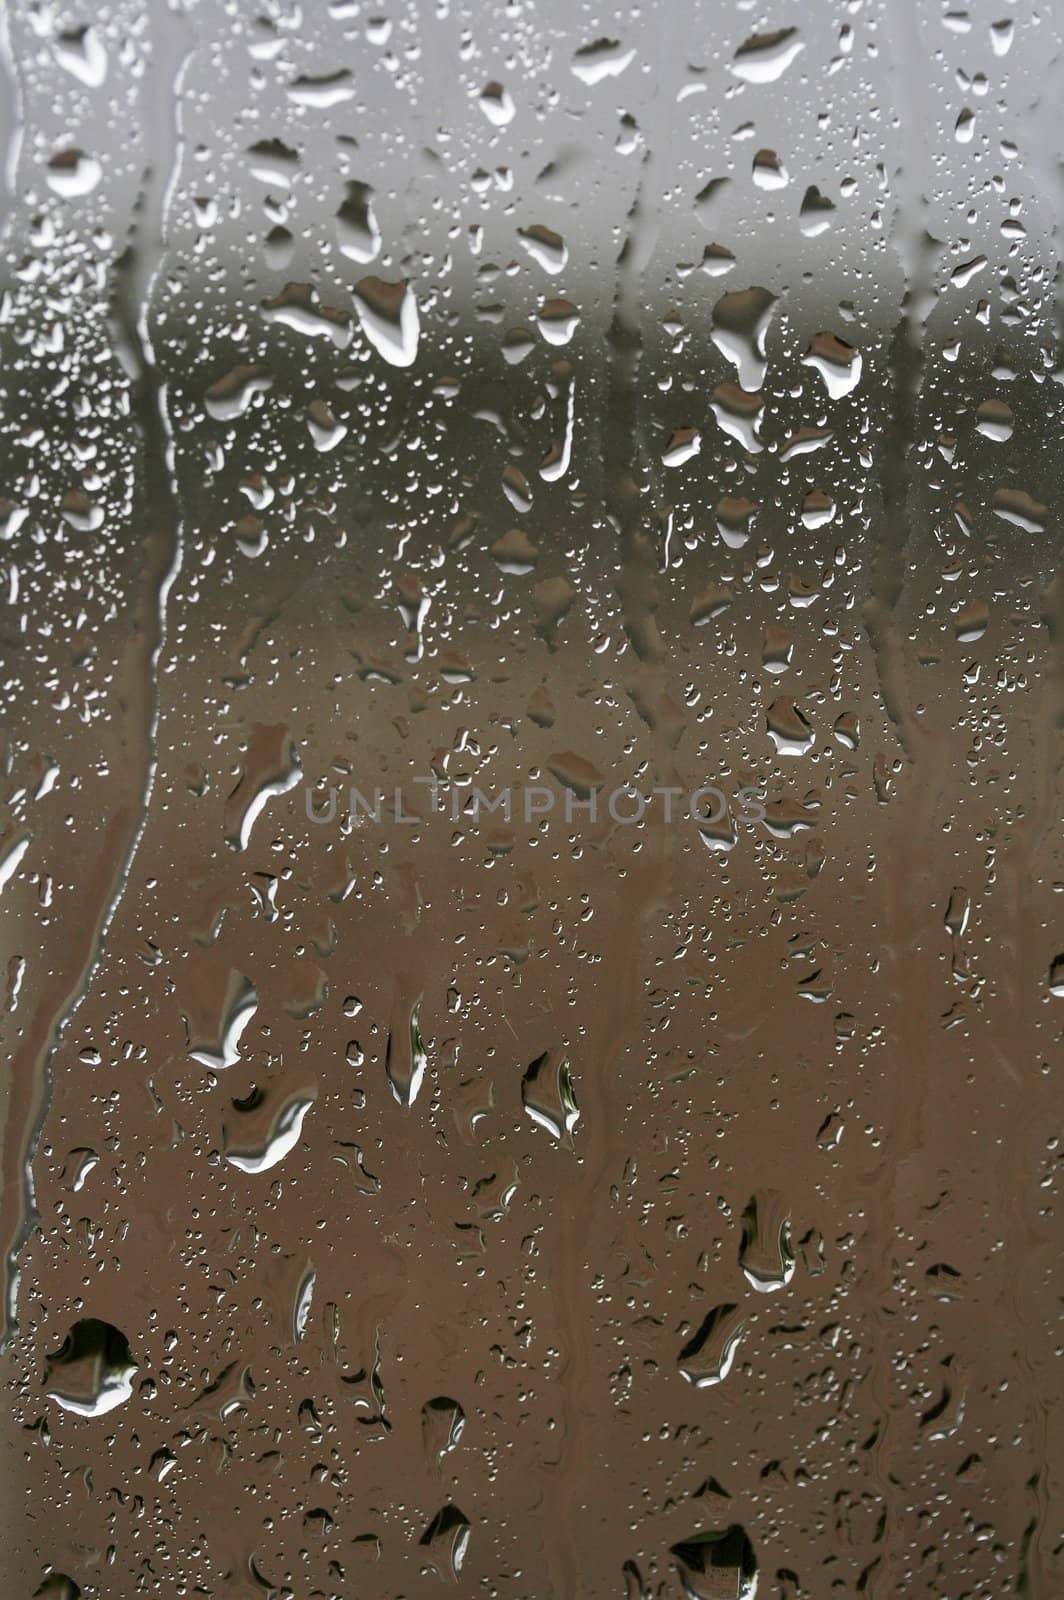 a picture of water drops on window